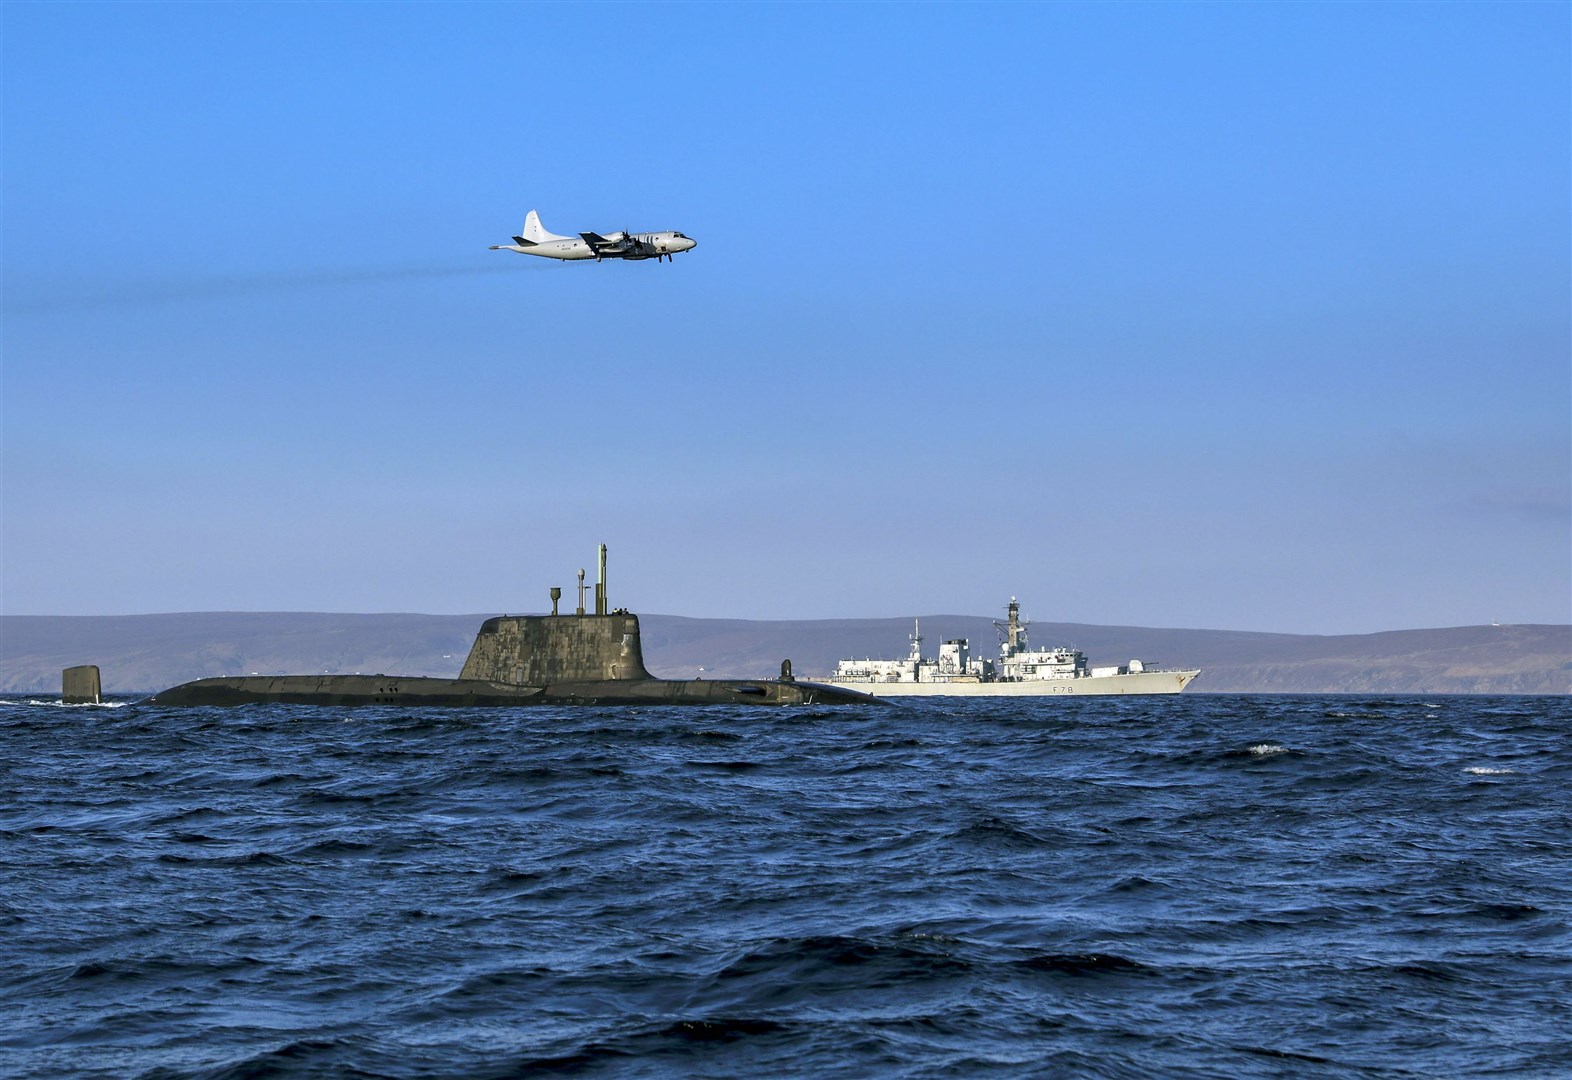 An Astute class nuclear submarine in company with the Type 23 frigate HMS Kent being over flown by a German Navy P3 maritime patrol aircraft.